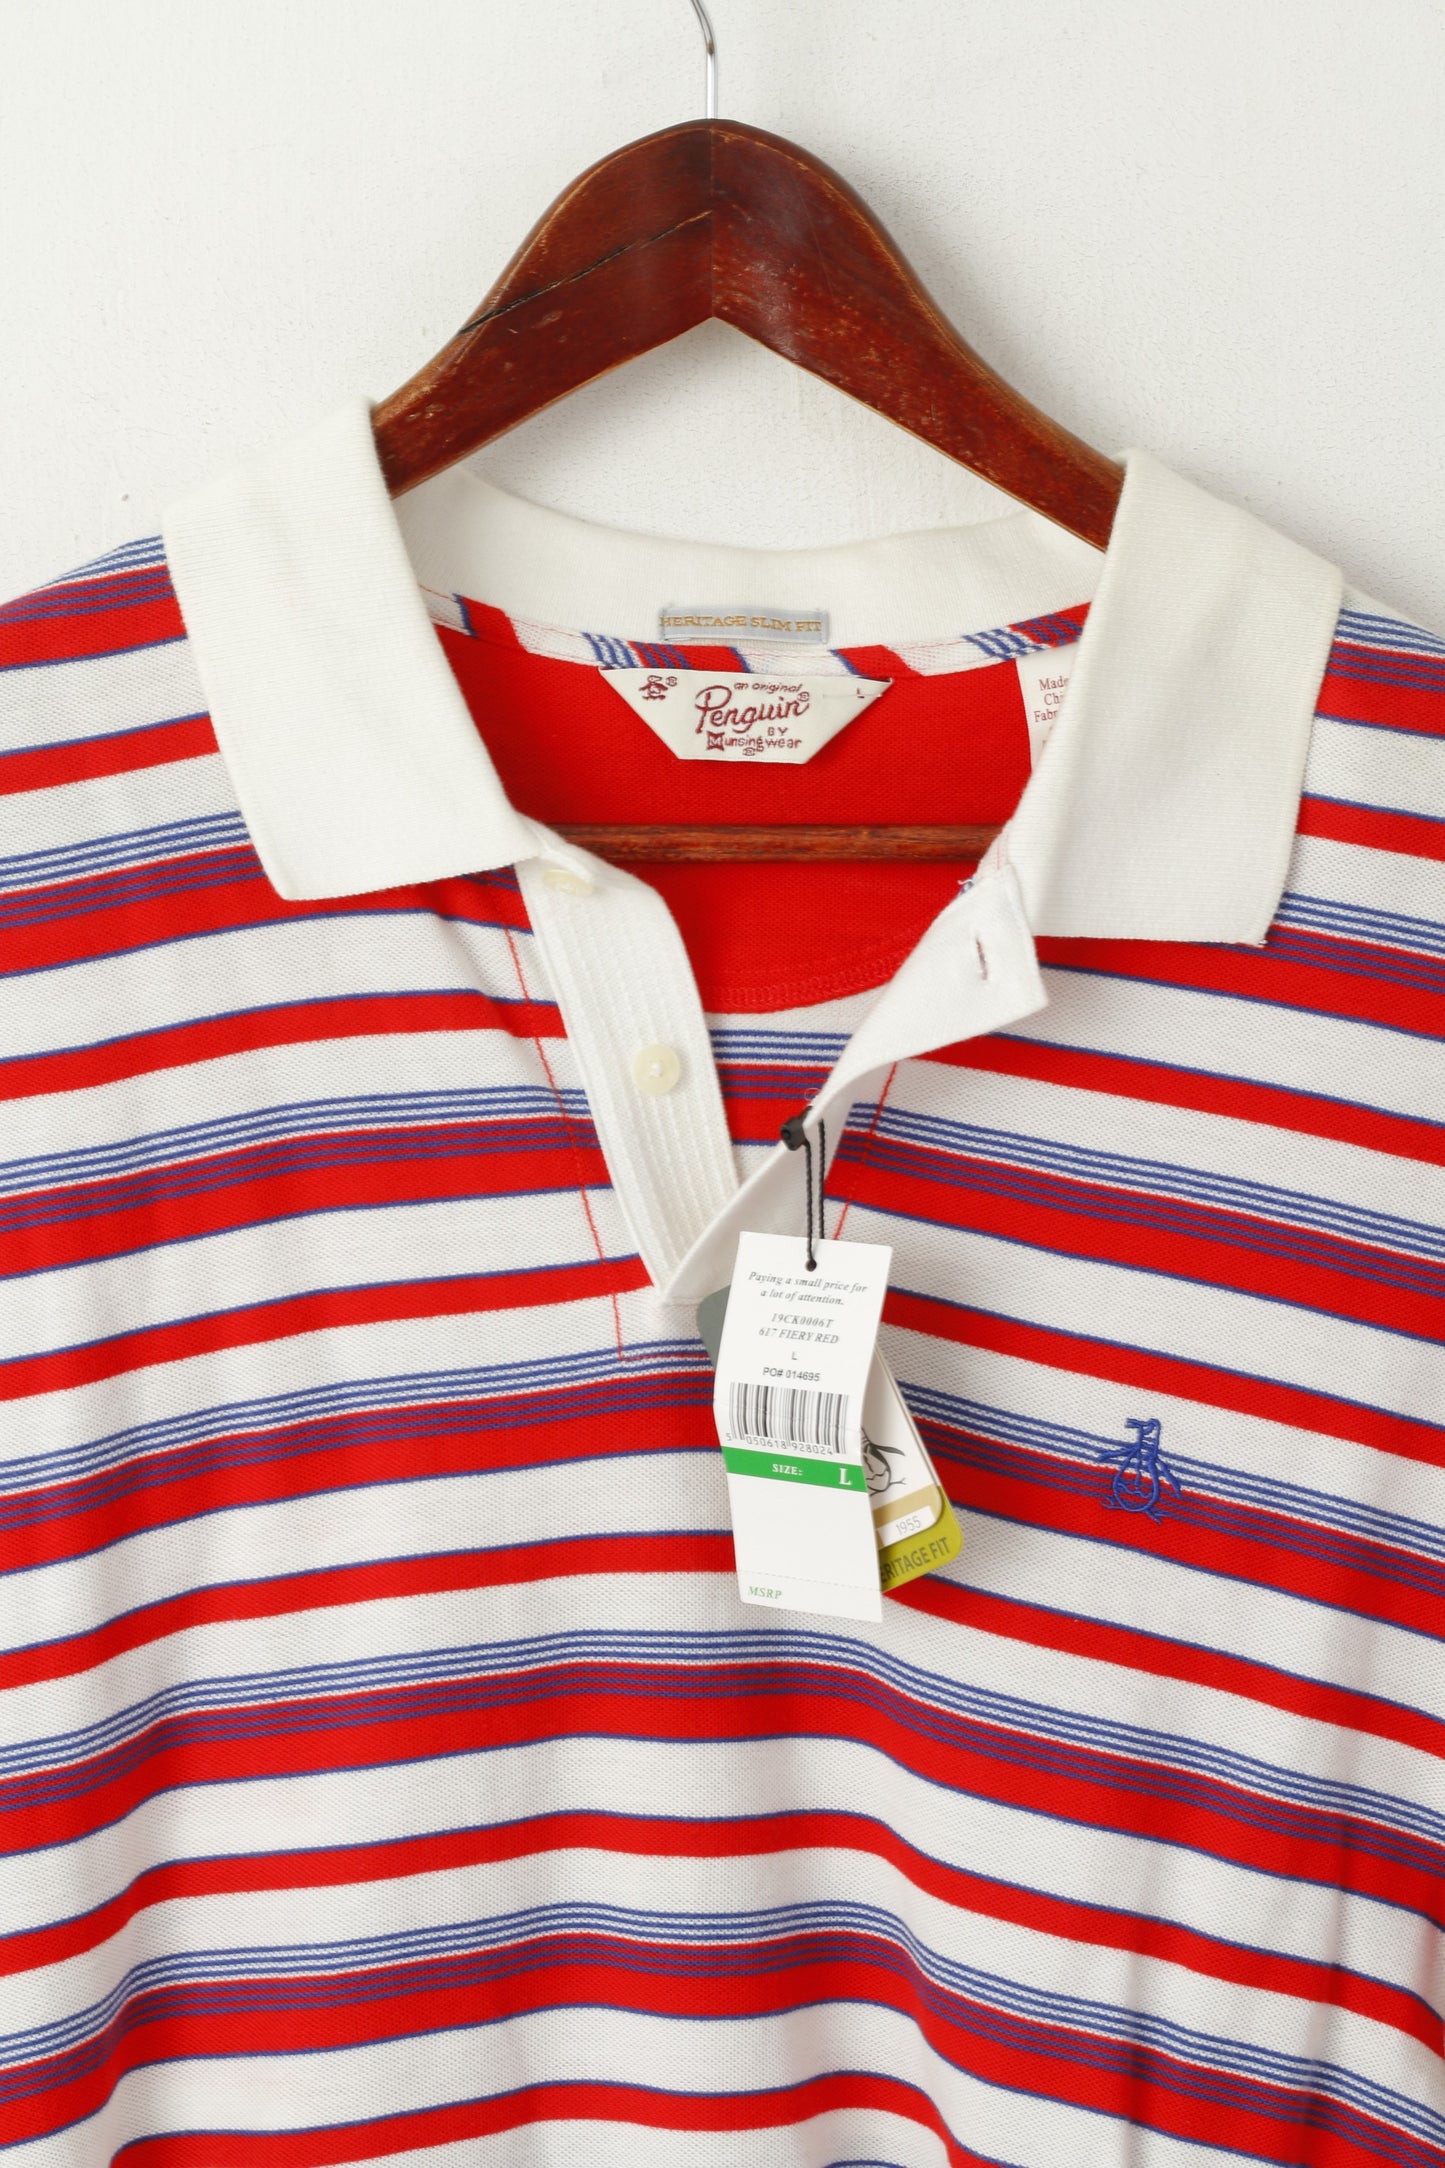 New Penguin Men L Polo Shirt Red Cream Cotton Striped Heritage Slim Fit Top